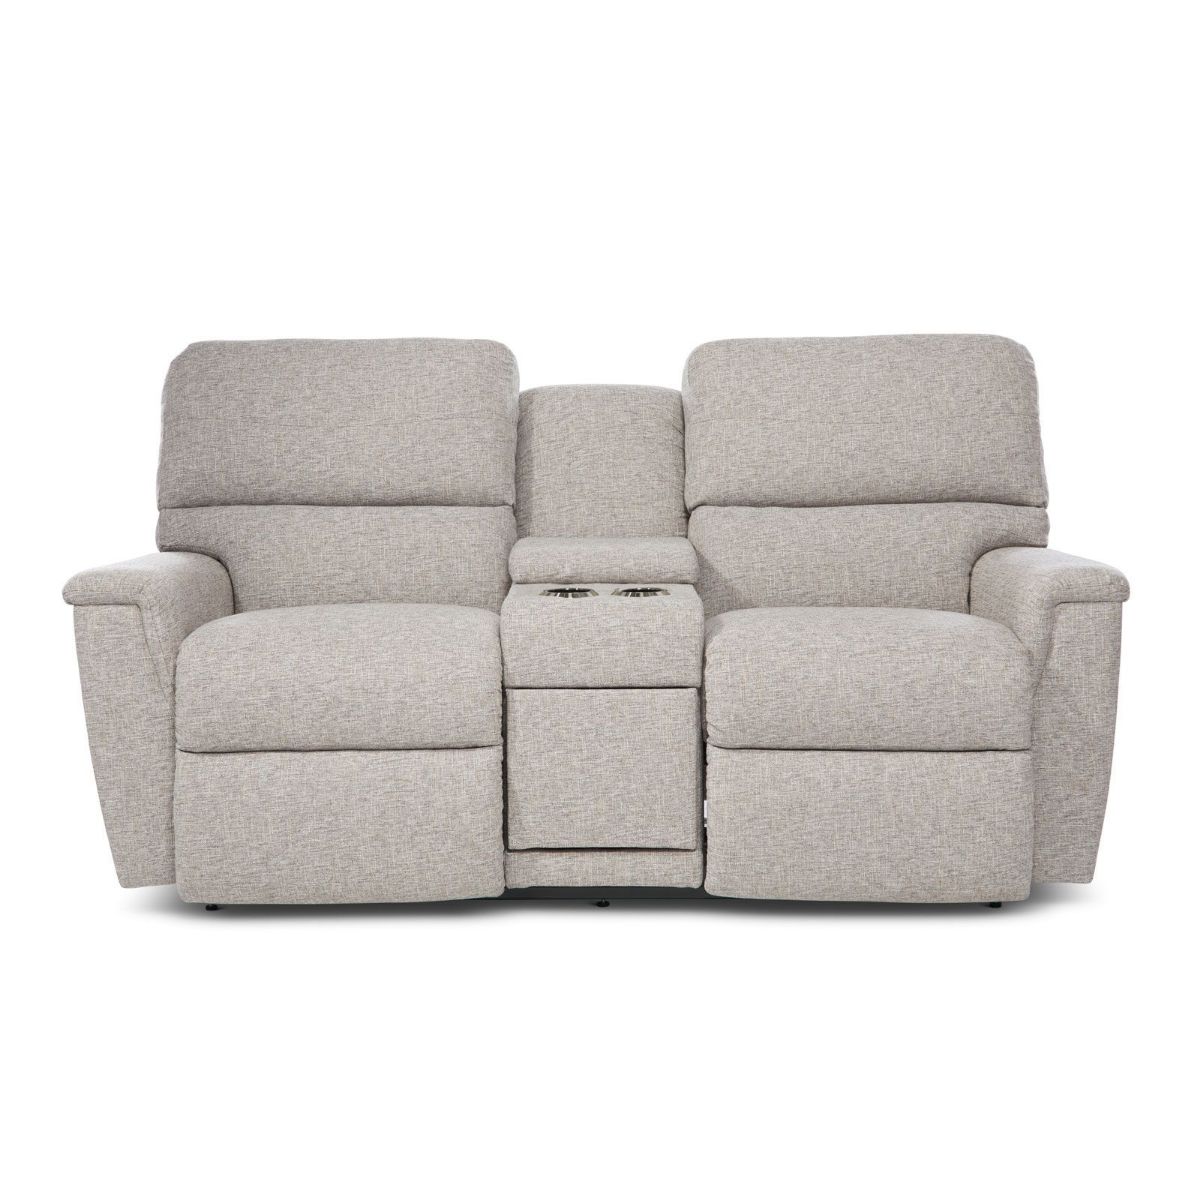 Picture of Ava Whisper Recliner Console Loveseat